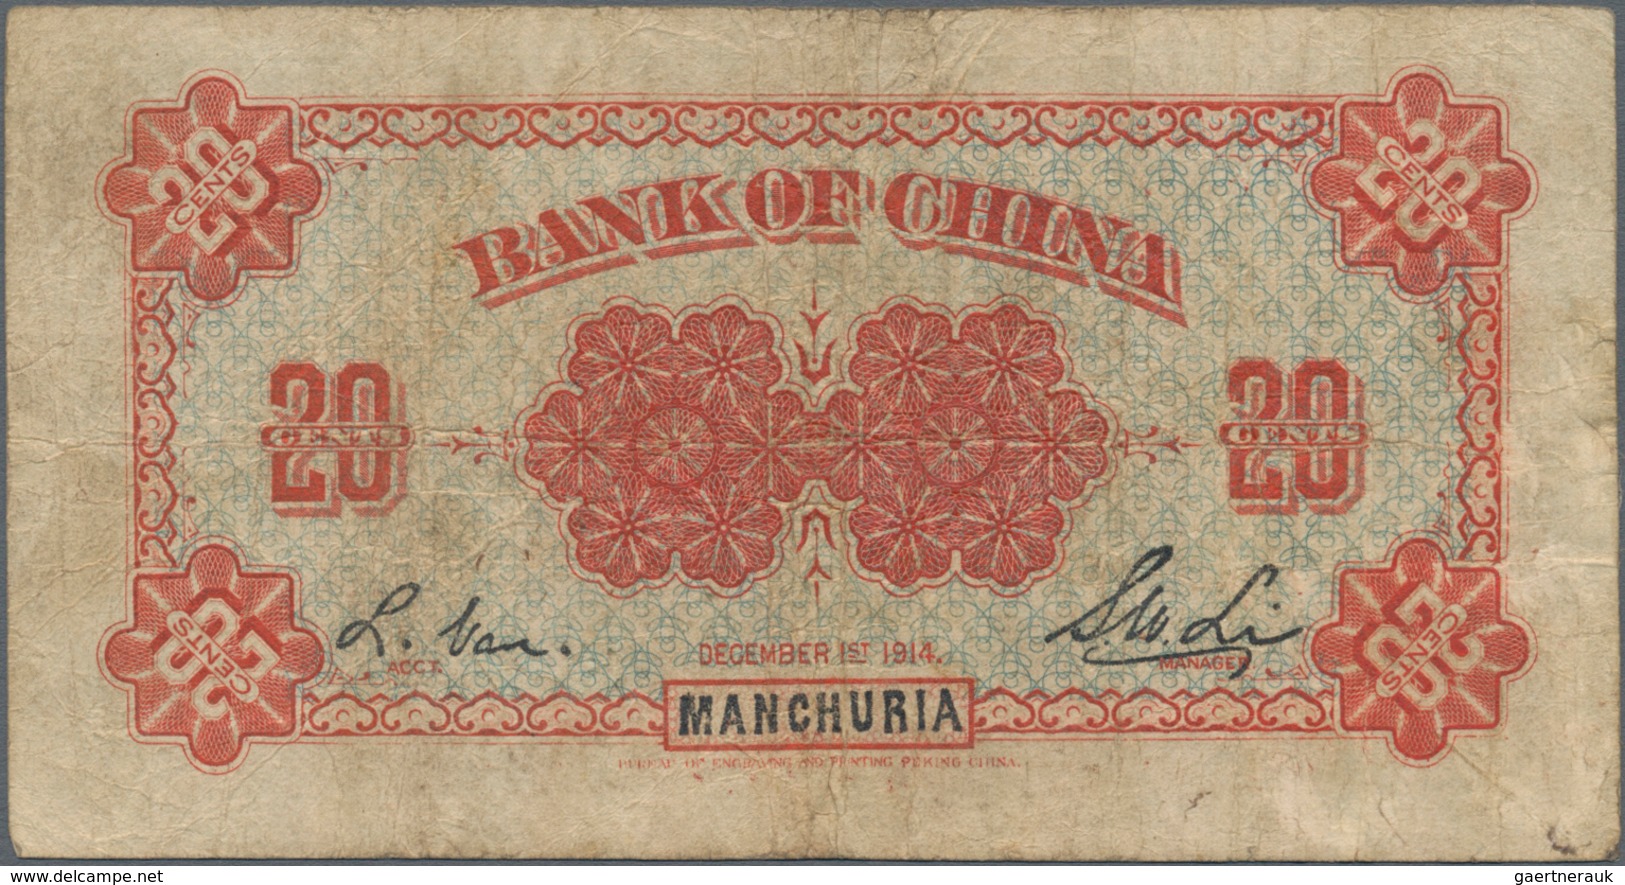 China: Bank Of China – MANCHURIA 20 Cents 1914, P.36a, Rare And Seldom Offered Banknote, Still Nice - Chine